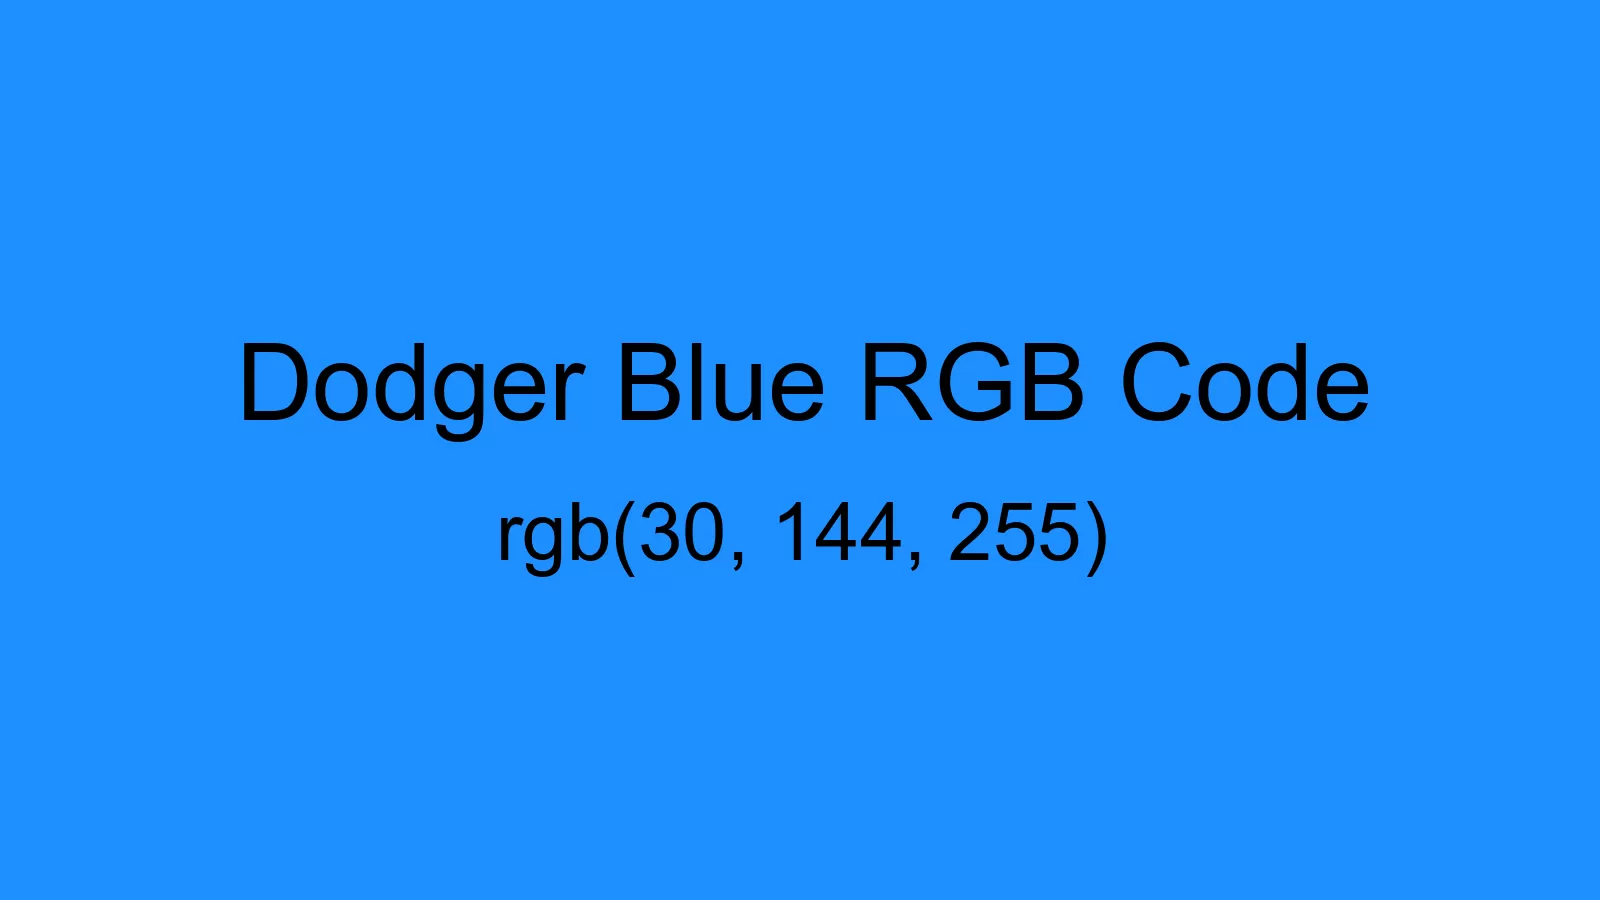 preview image of Dodger Blue color and RGB code